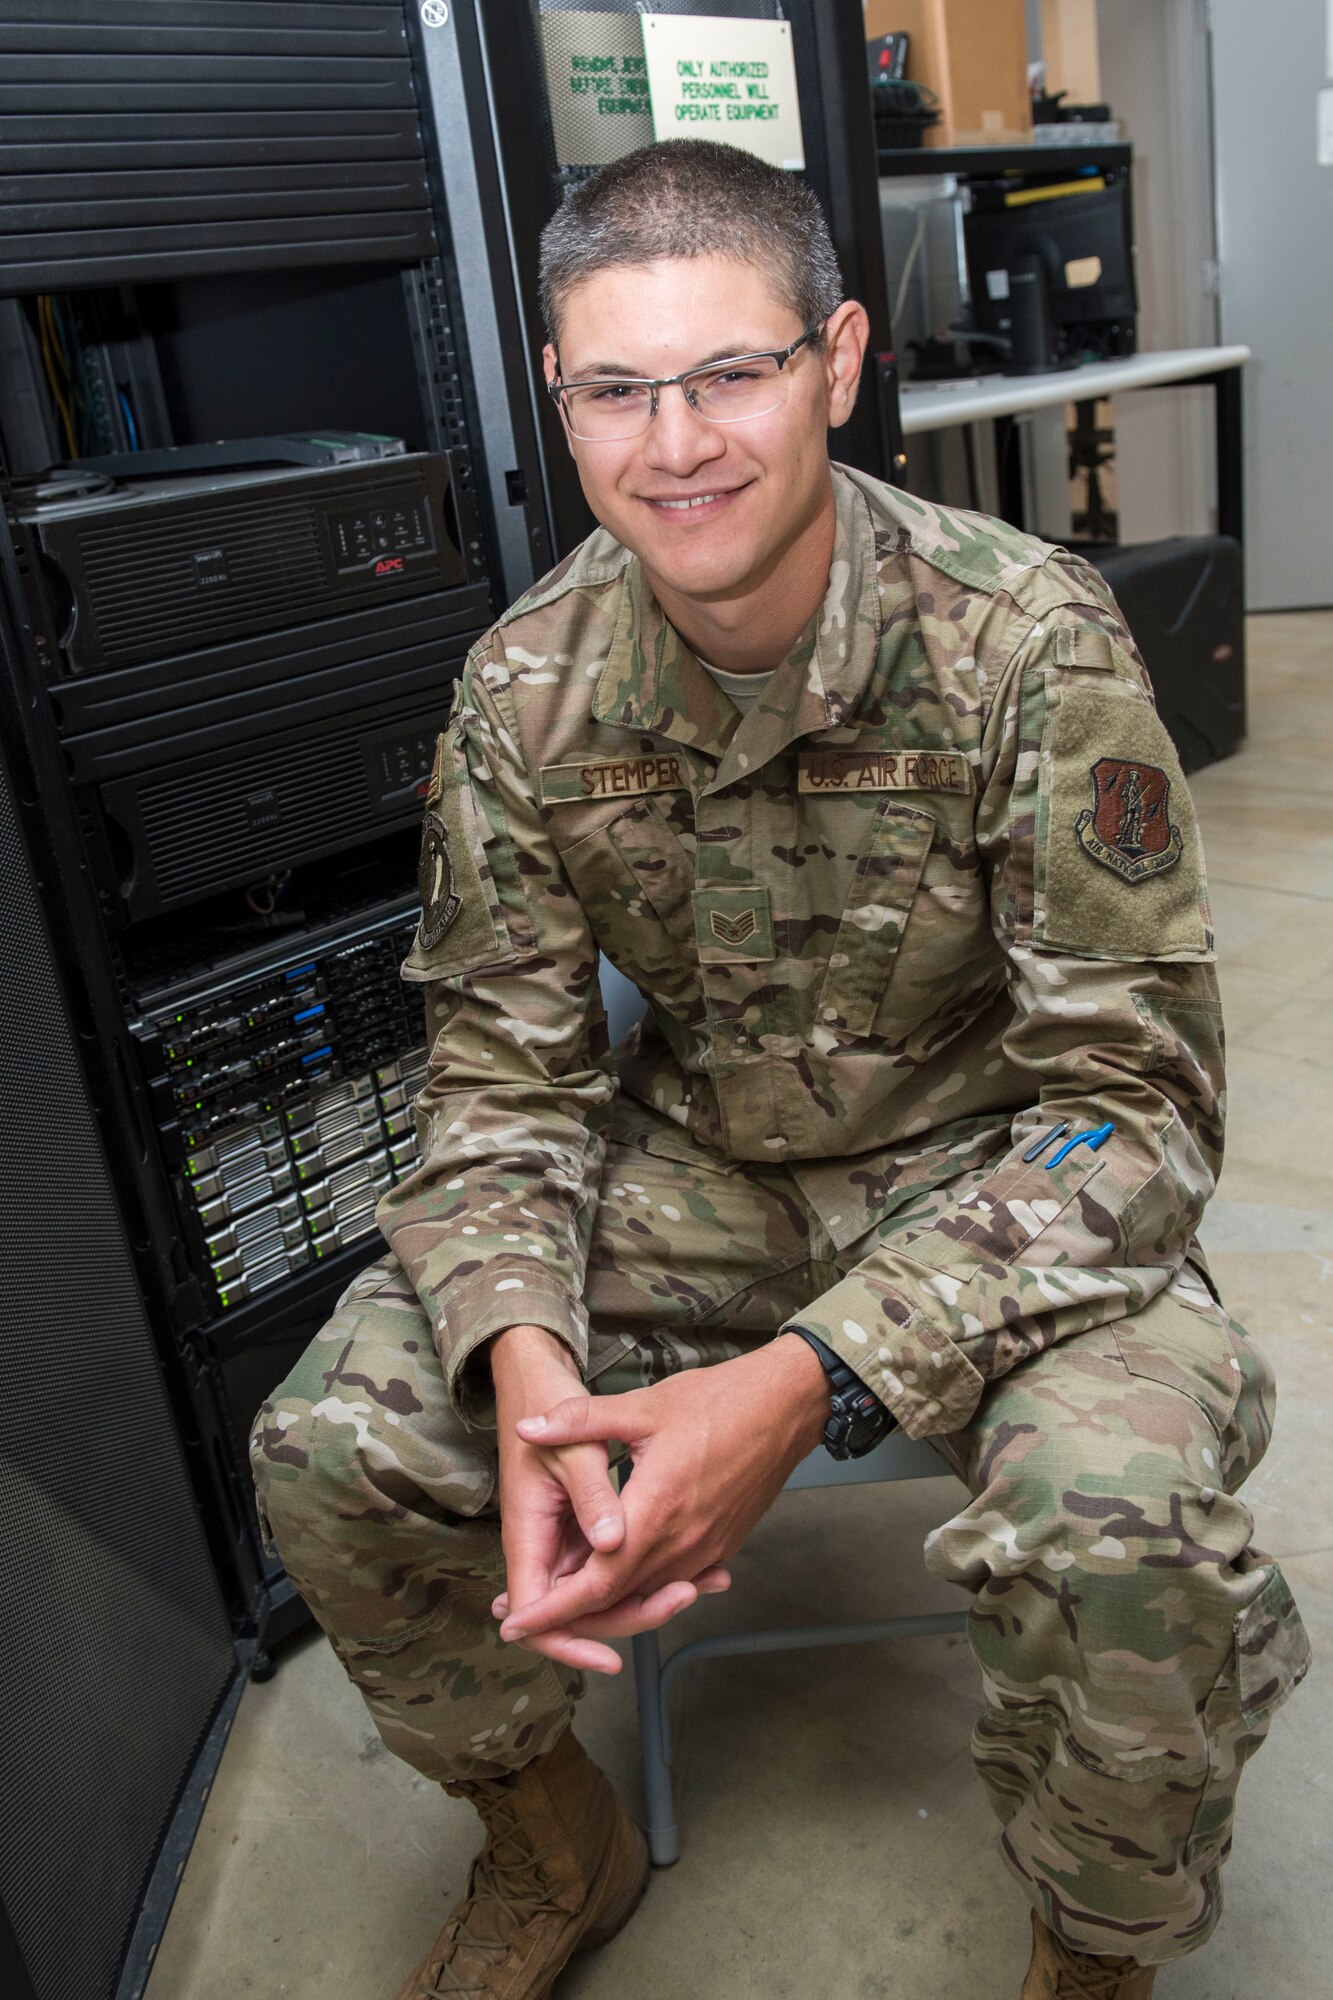 Staff Sgt. Matthew Stemper, a cyber systems operations technician for the 167th Communications Flight, is the Airman Spotlight for 167th Airlift Wing for September 2019. (U.S. Air National Guard photo by Senior Master Sgt. Emily Beightol-Deyerle)